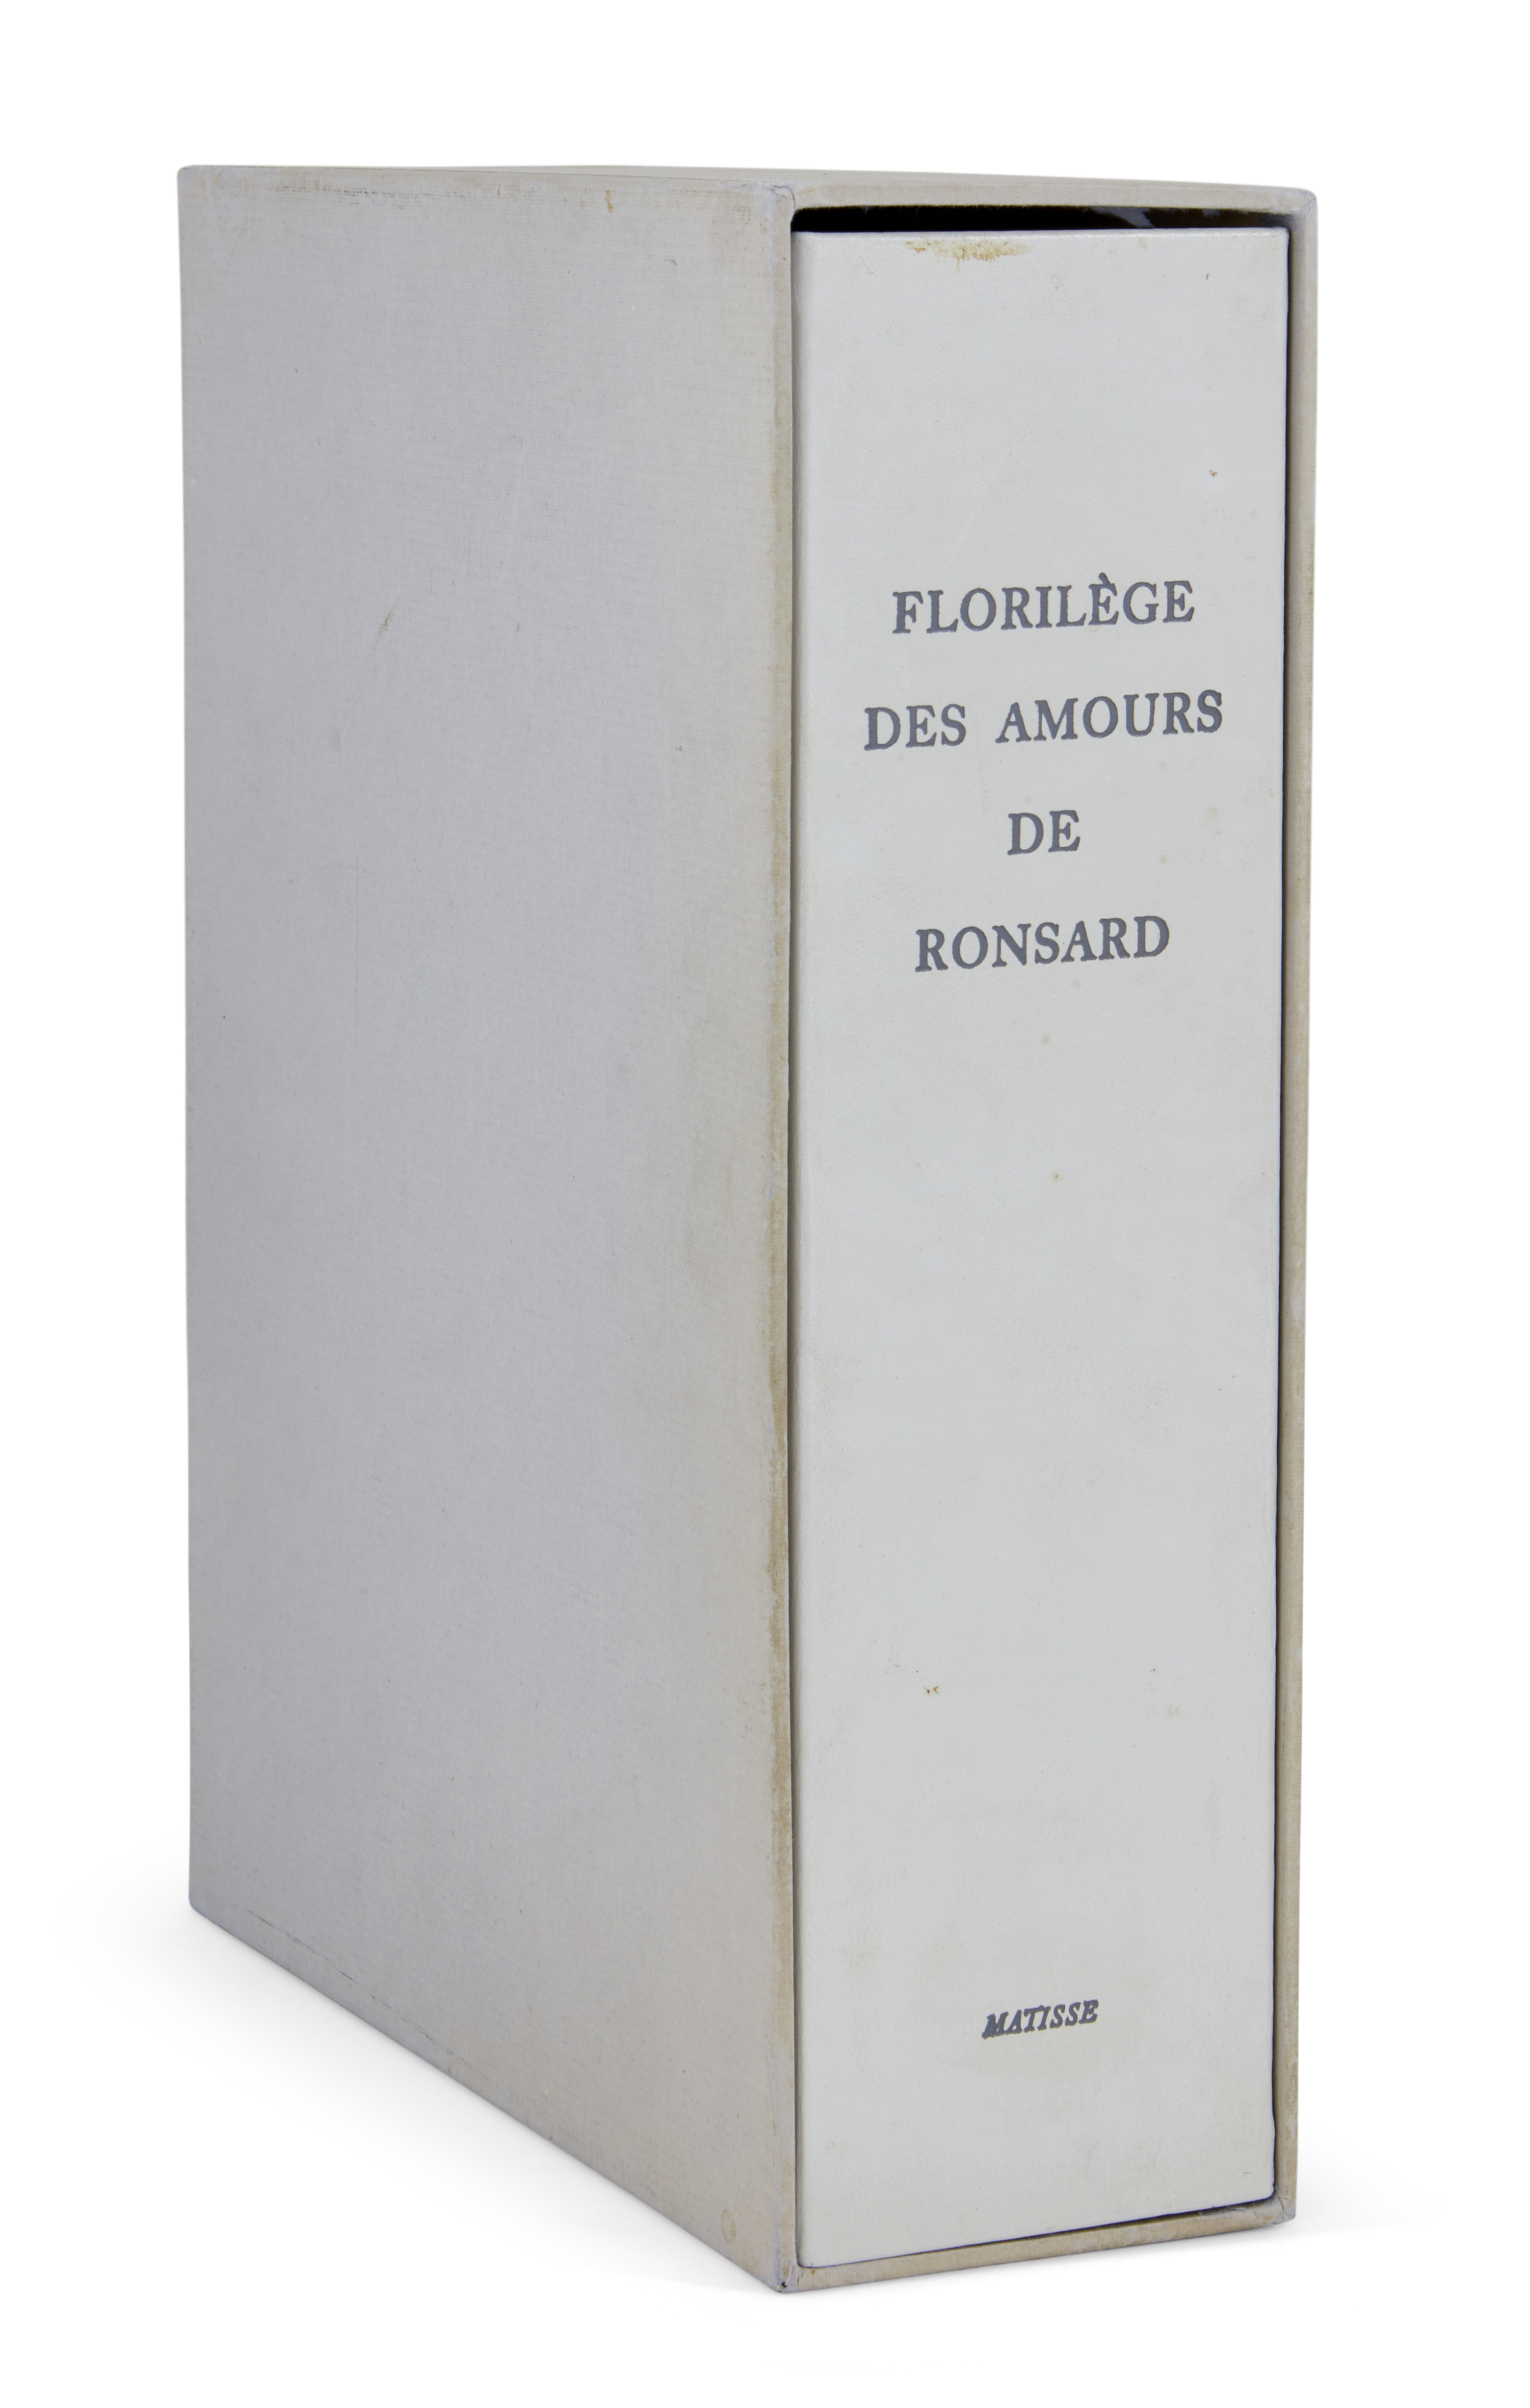 Henri Matisse, French 1869-1954, Florilege des Amours de Ronsard, 52 works from the suite of 126... - Image 4 of 4